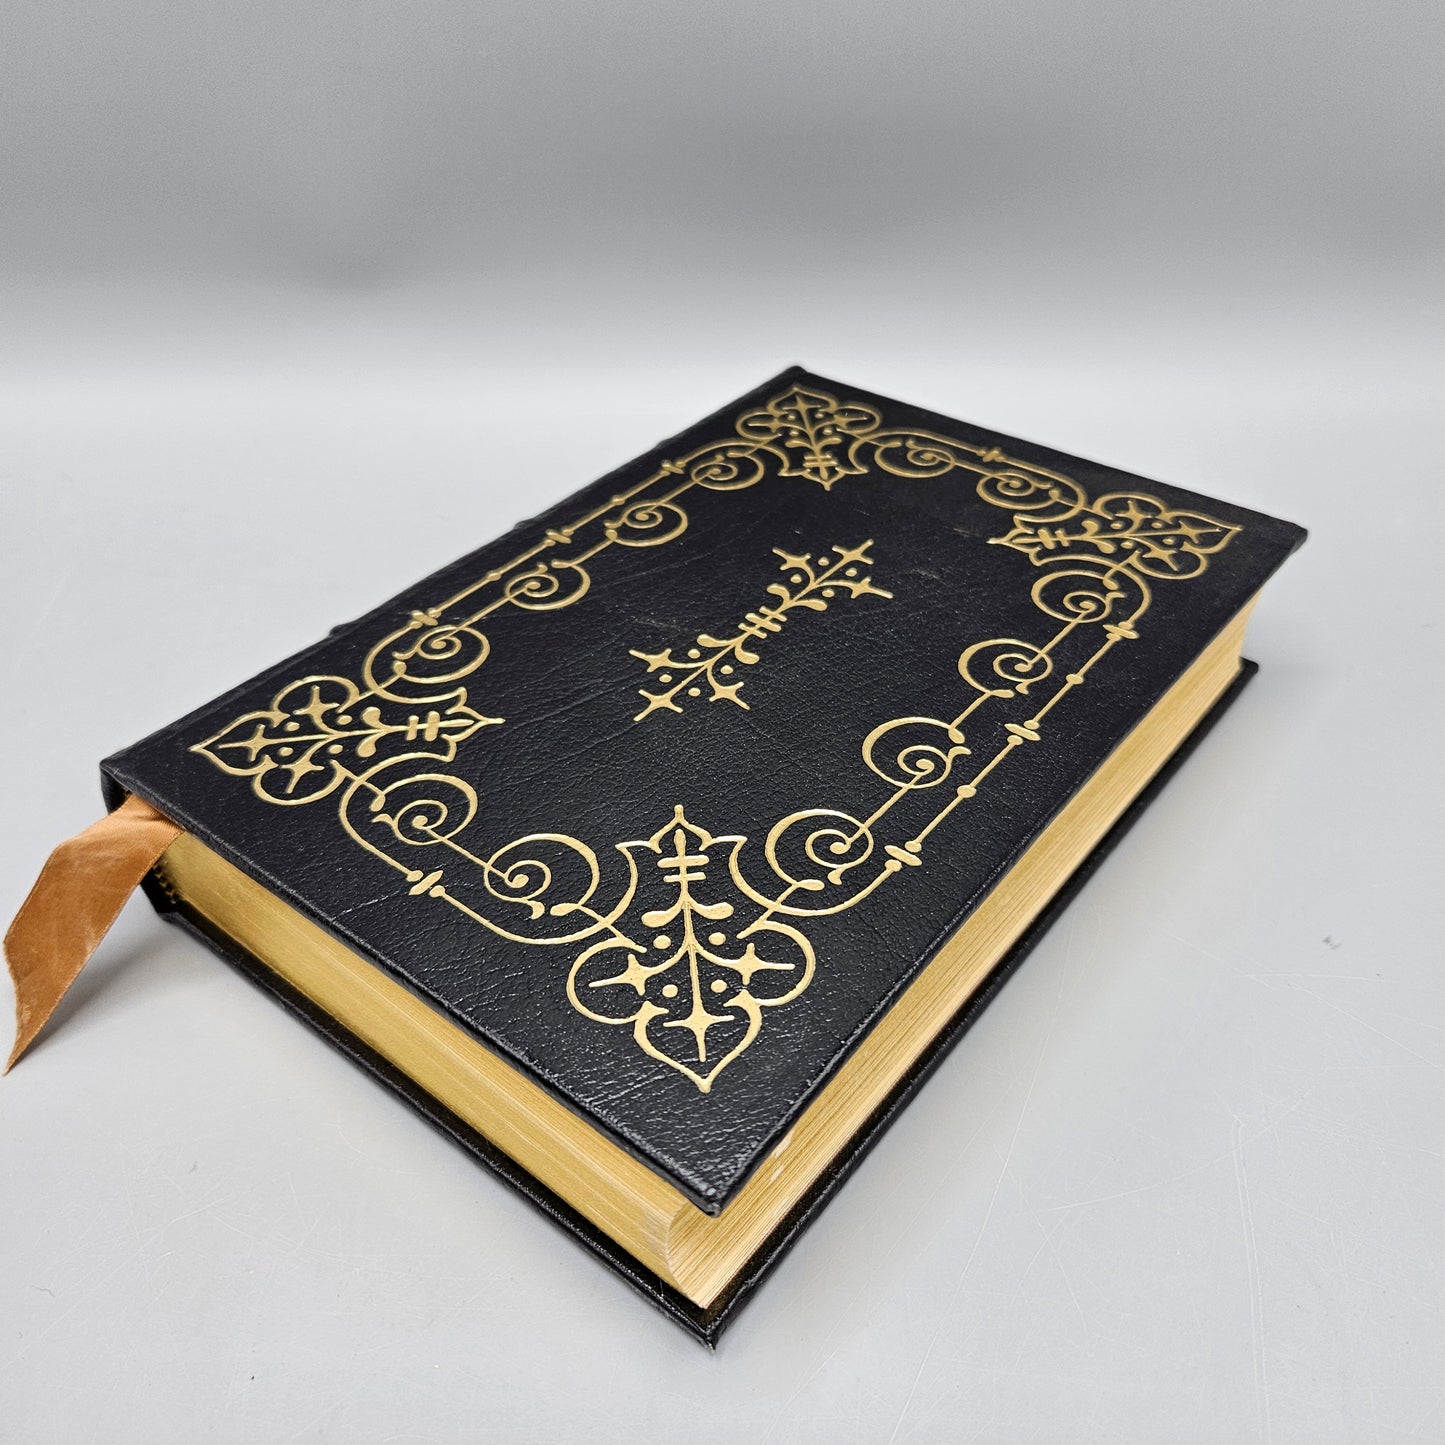 Leatherbound Book - Samuel Butler "The Way of All Flesh" Easton Press